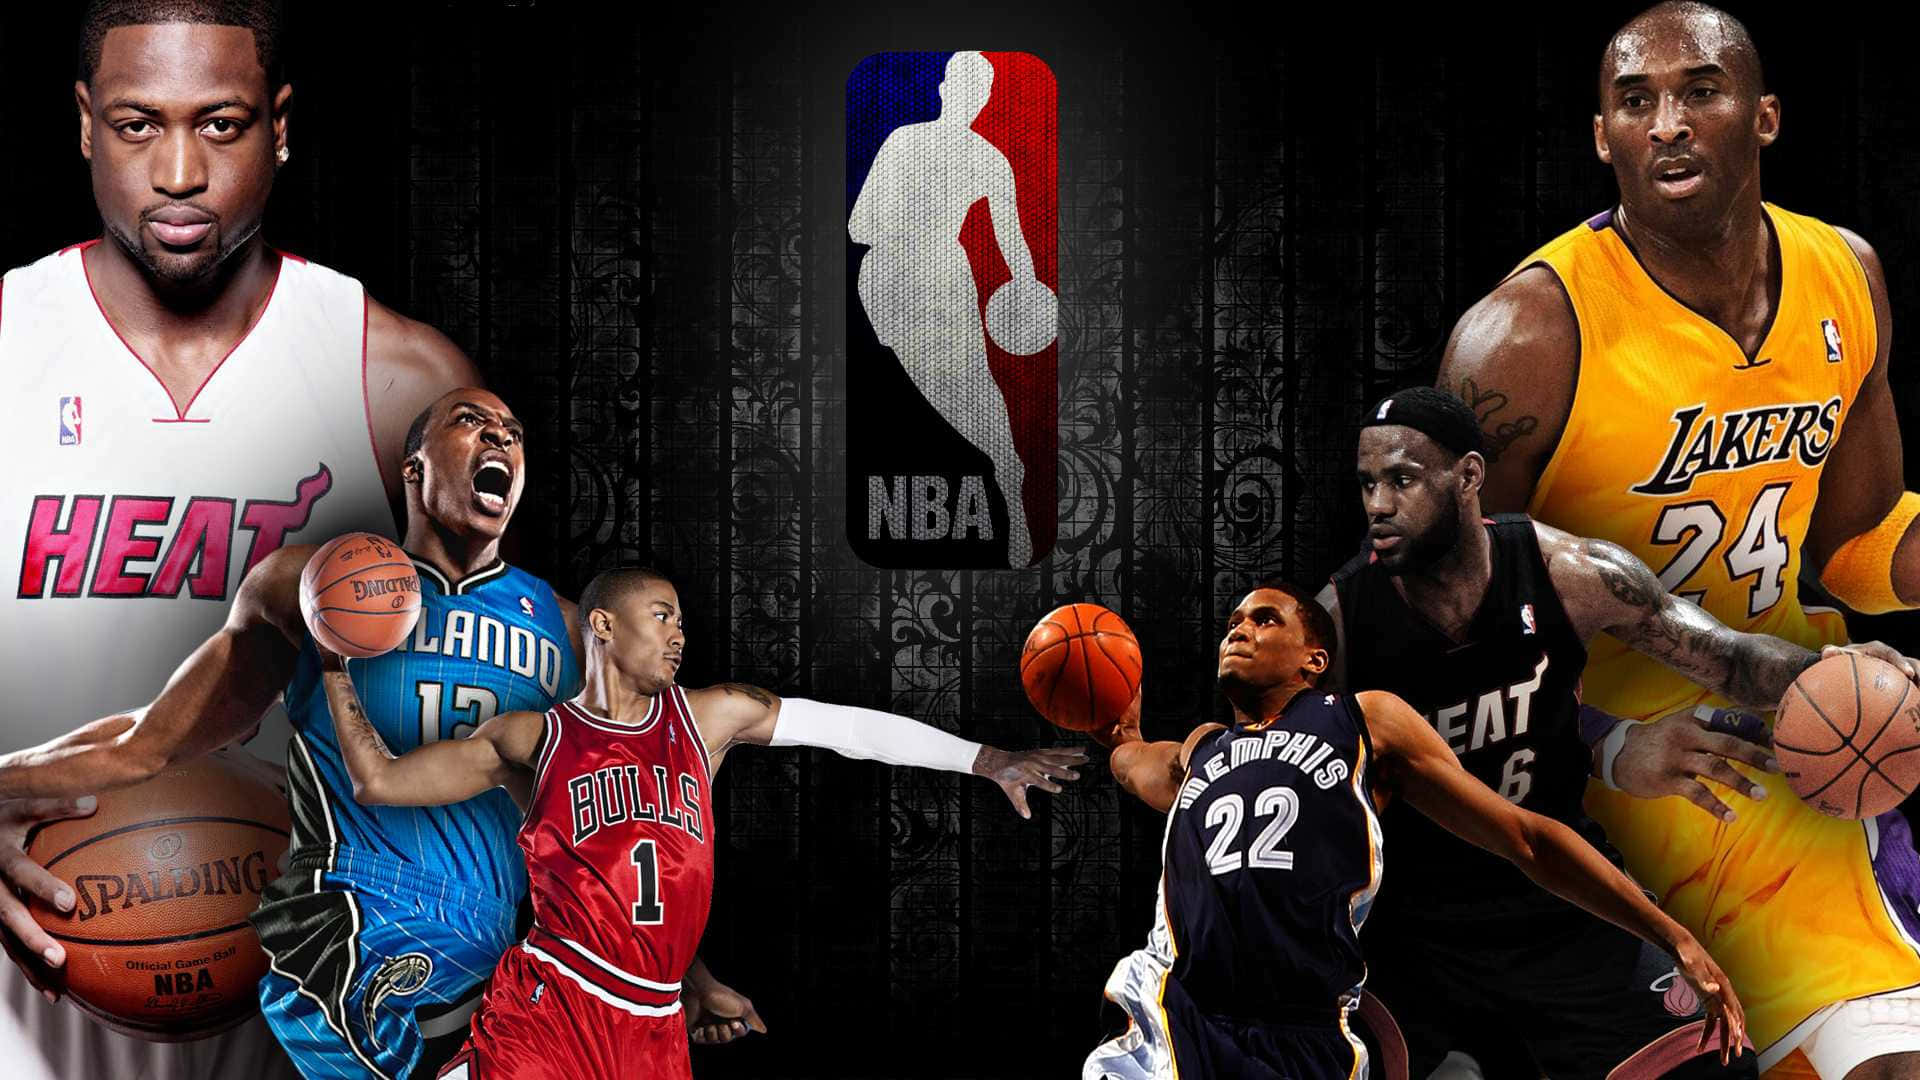 Celebrating the Best of the NBA! Wallpaper